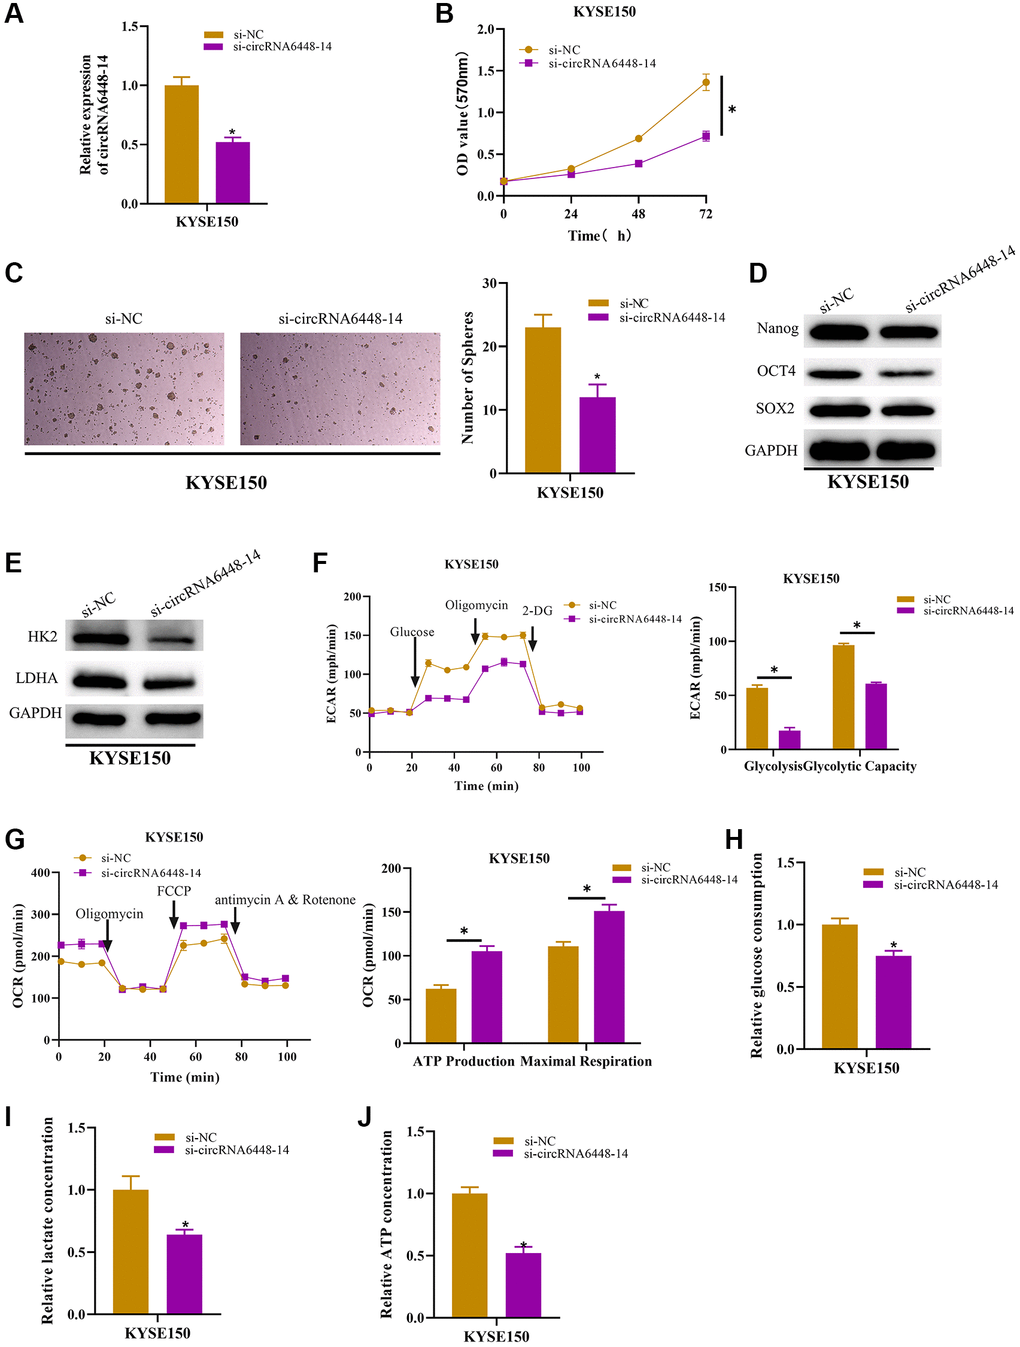 circRNA6448-14 increases stemness and glycolysis in ESCC cells. (A) qRT-PCR detection of circRNA6448-14 expression in circRNA6448-14 knockdown and control cells. (B) MTT assay detection of cell viability in circRNA6448-14 knockdown and control cells. (C) Stem cell sphere formation experiment in circRNA6448-14 knockdown and control cells. (D, E) WB detection of stem cell surface marker proteins Nanog, OCT4, SOX2 expression and glycolysis rate-limiting enzymes HK2, LDHA expression in circRNA6448-14 knockdown and control cells. (F) The ECAR of circRNA6448-14 knockdown and control cells. (G) The OCR of circRNA6448-14 knockdown and control cells. (H–J) The kits detected glucose consumption, lactate production, and ATP generation levels in cells. *P 